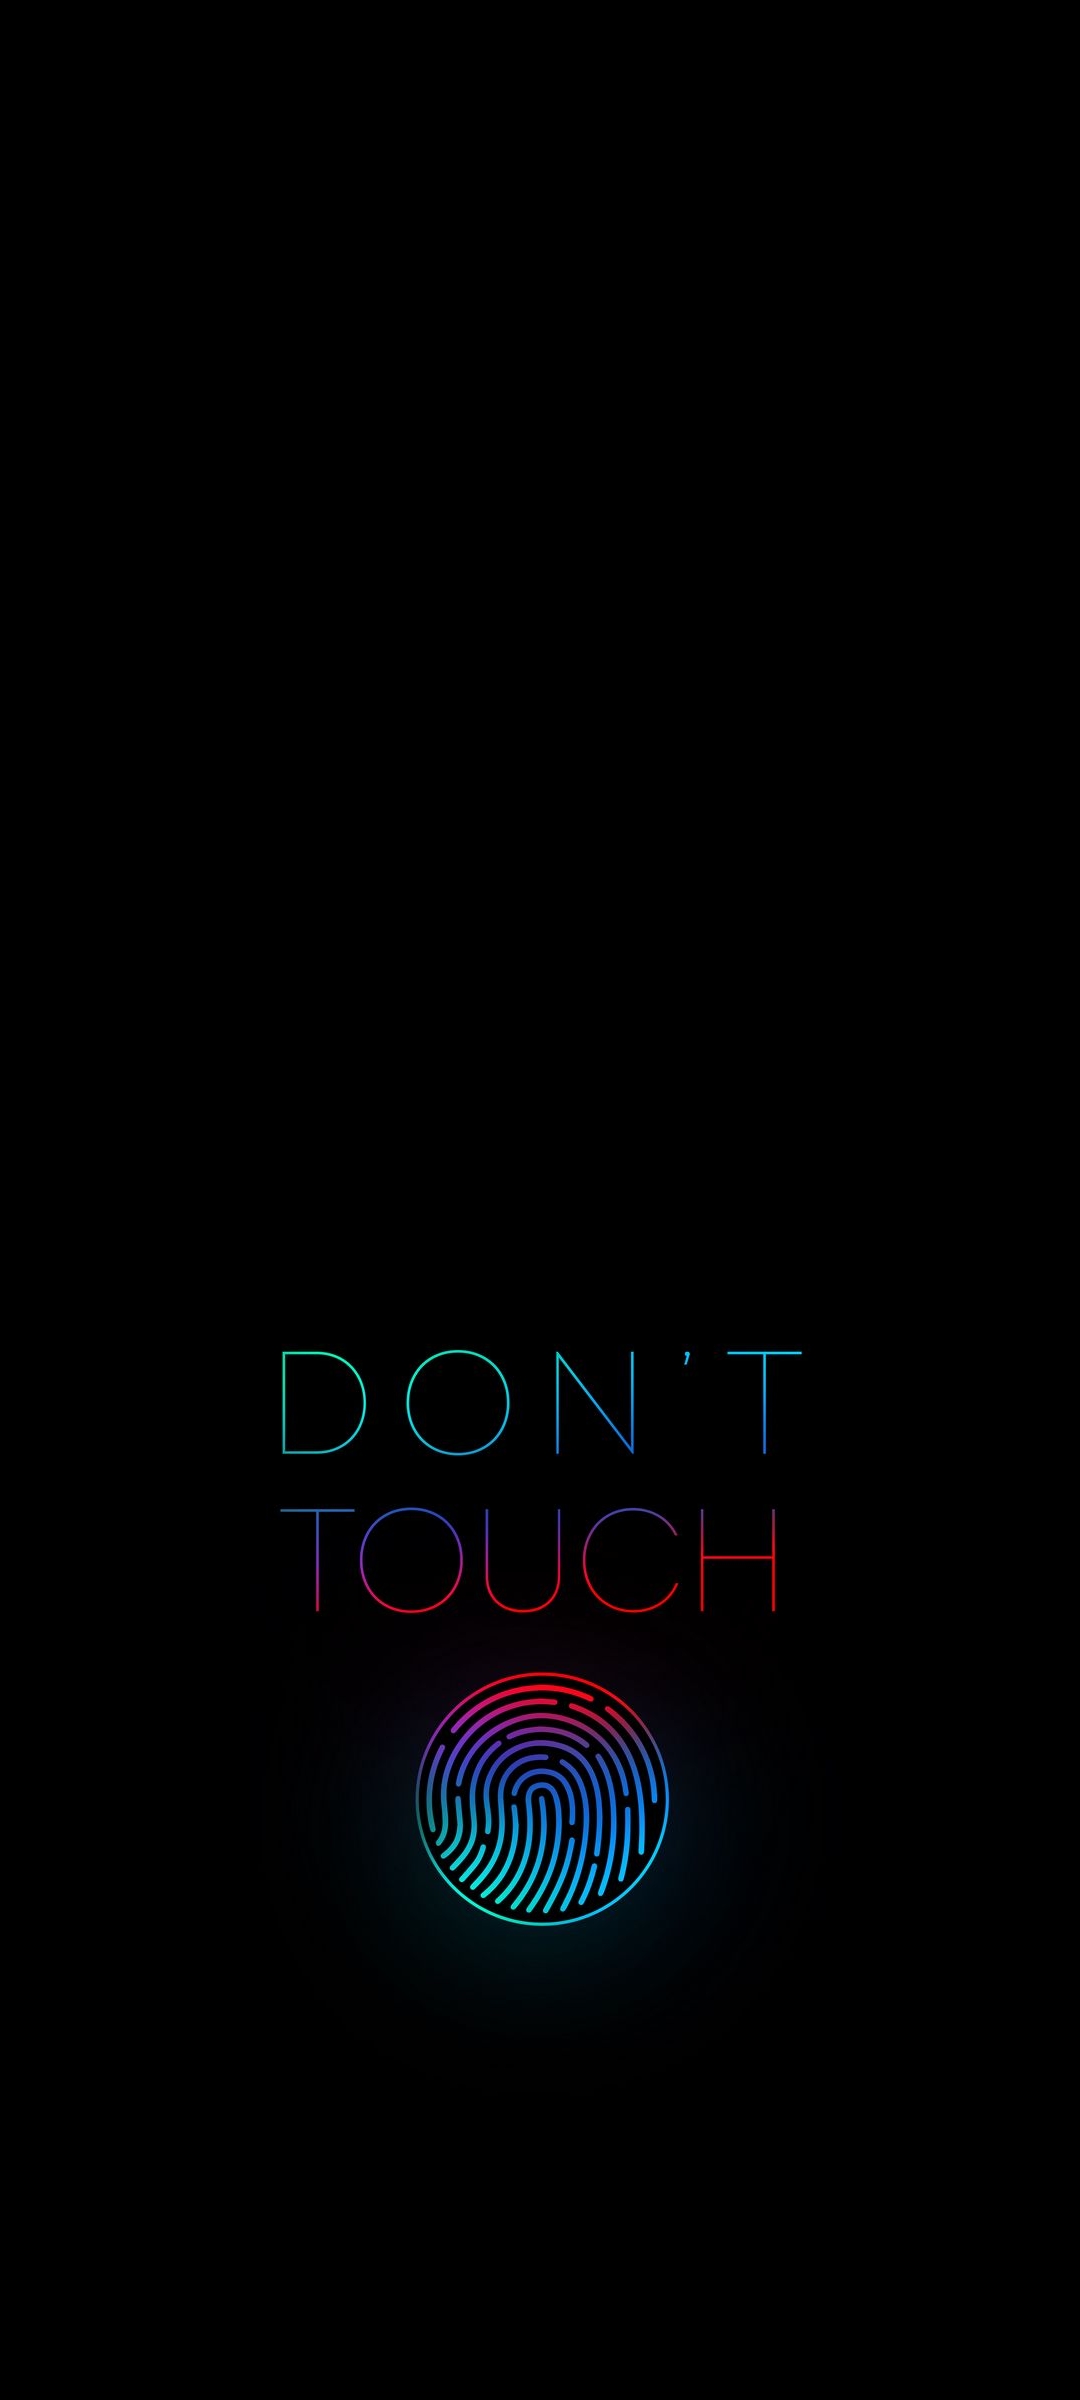 Fingerprint Dont Touch Black Phone – Wallpaper - Chill-out Wallpapers